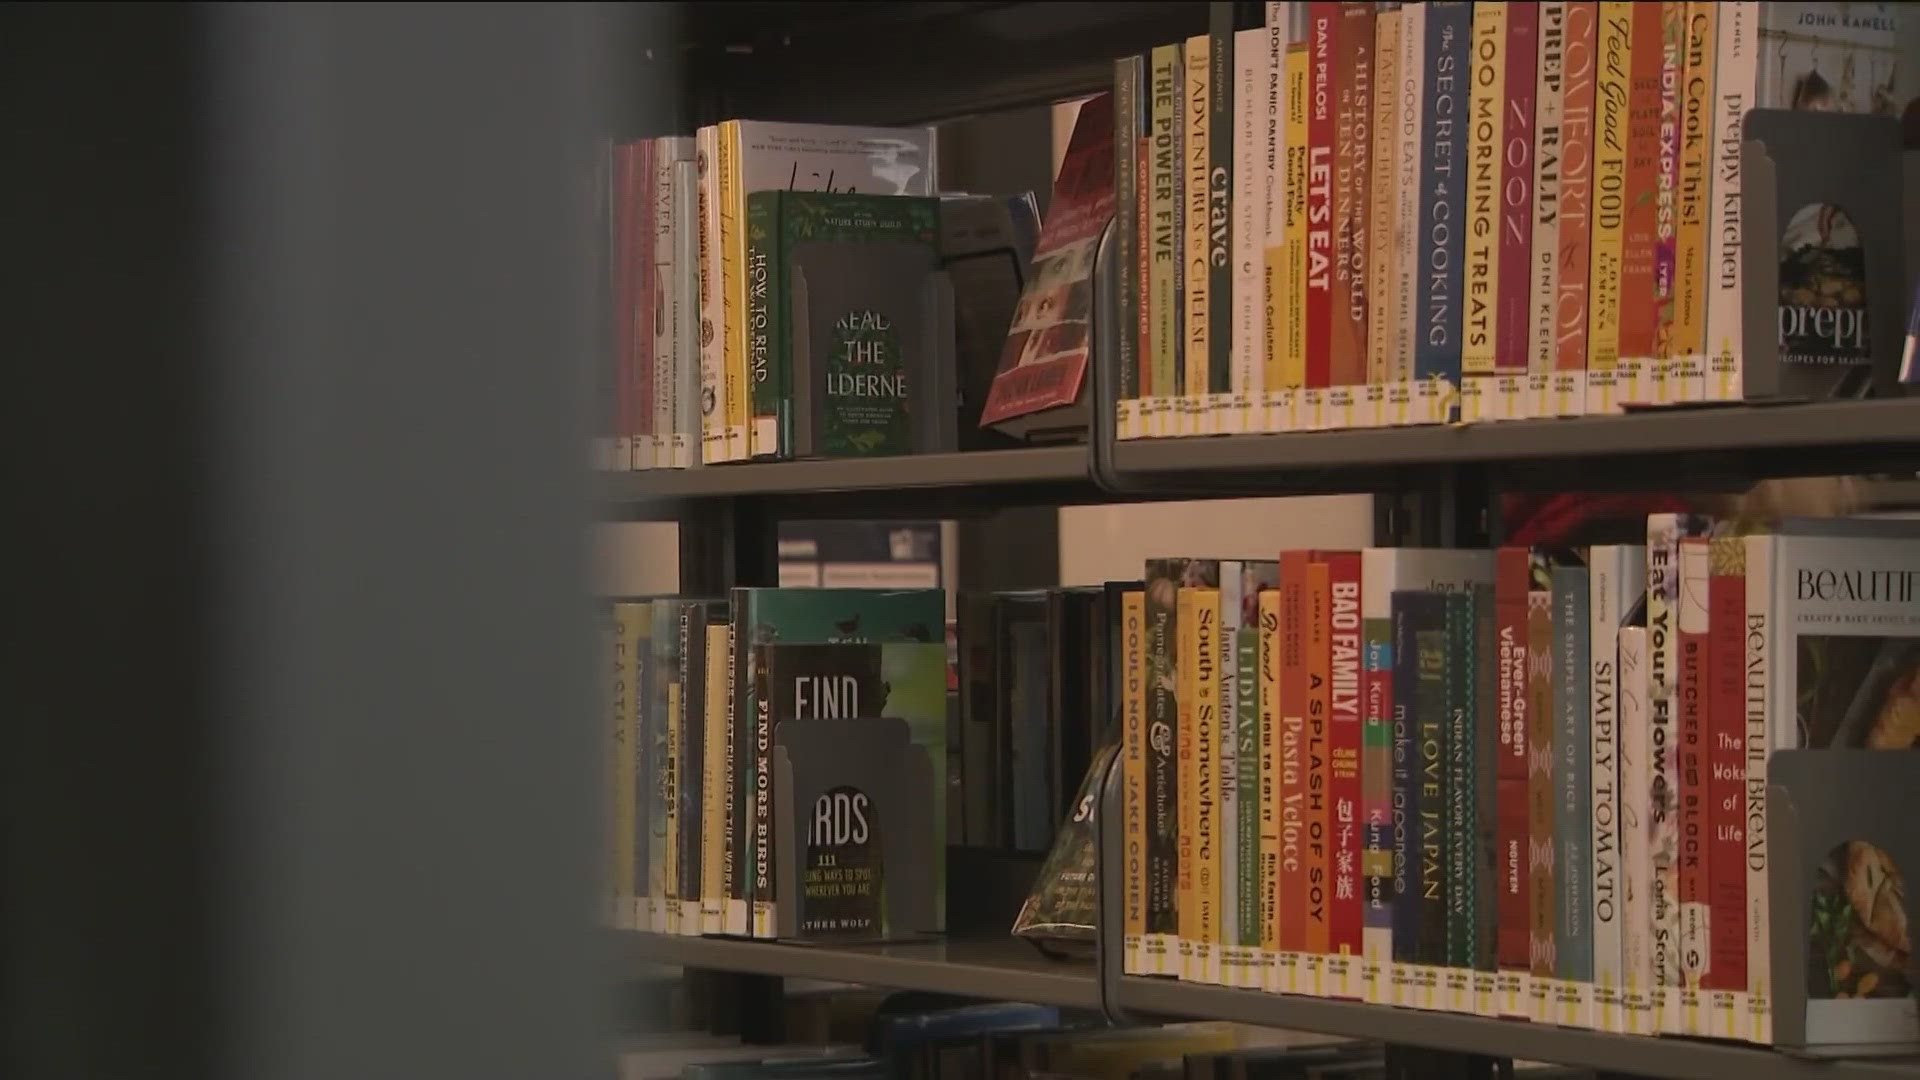 A group of schools, libraries and their patrons have filed a lawsuit against HB 701, stating that it is "unconstitutional." The law went into effect July 1.